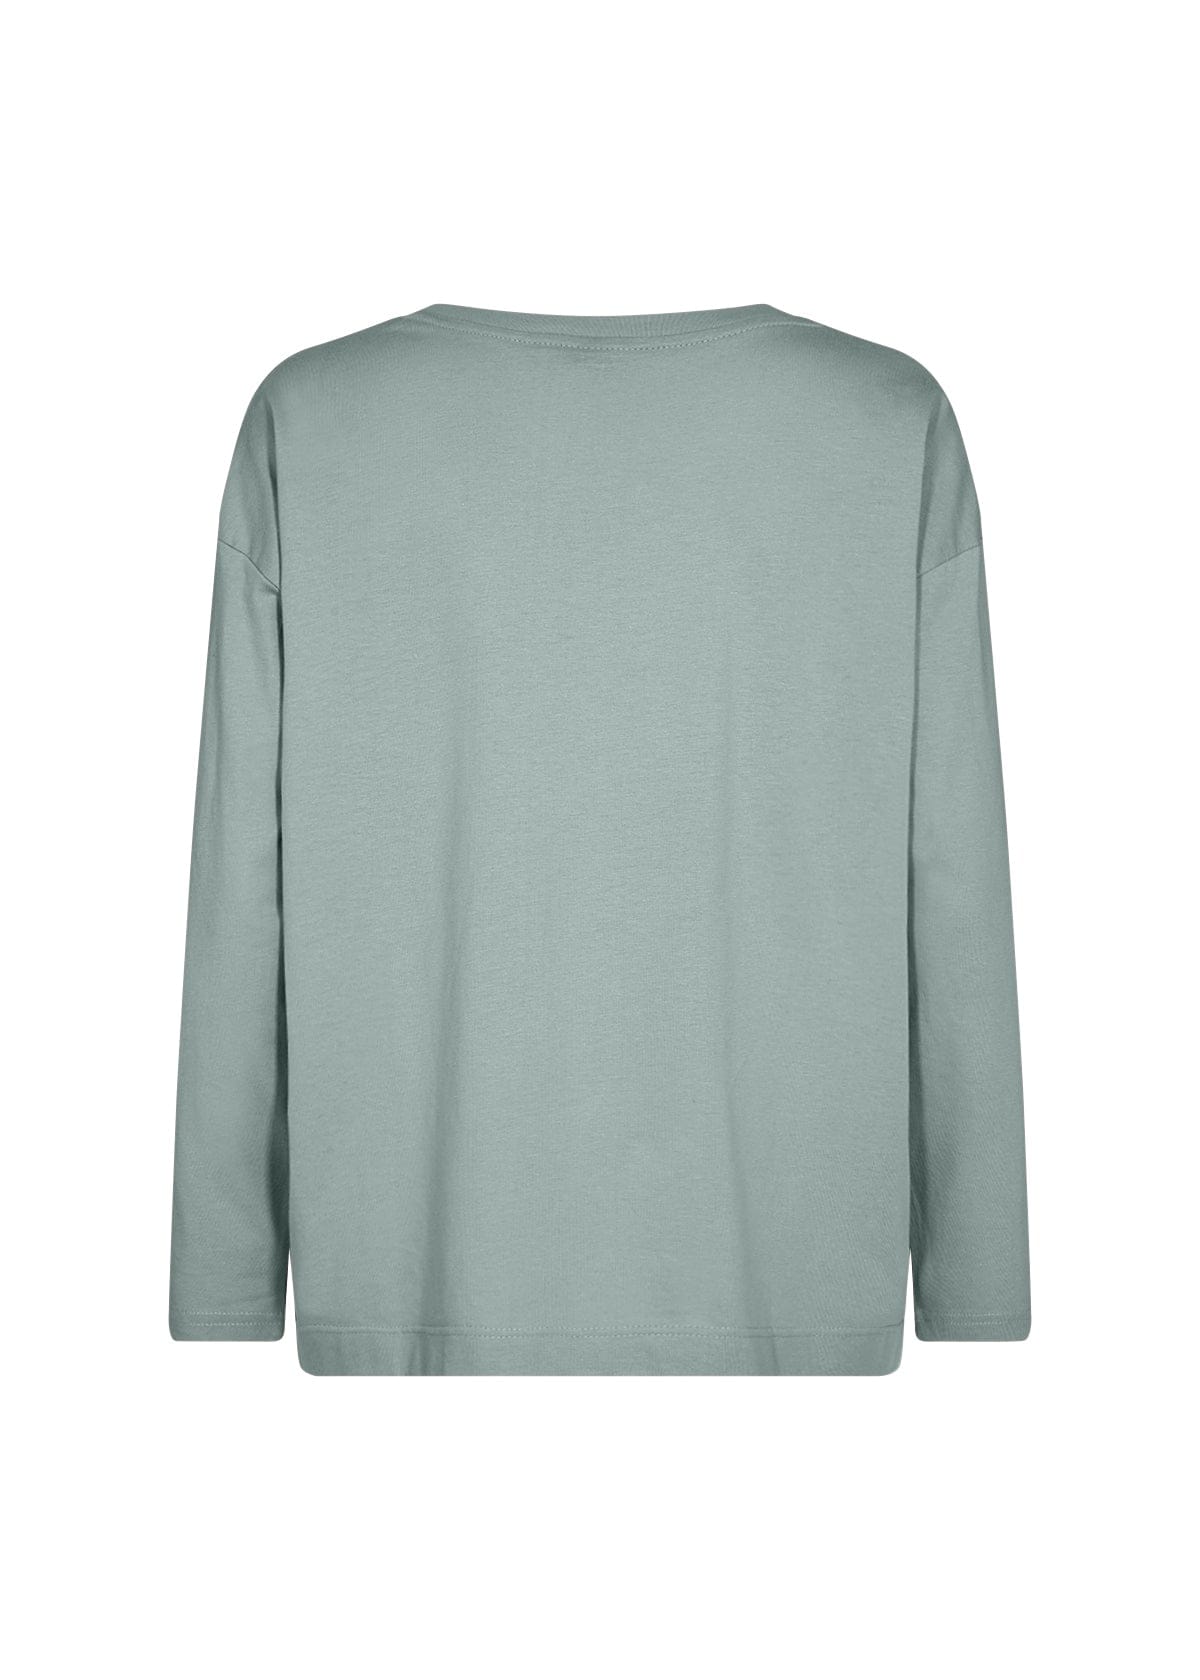 Derby Long Sleeve T-Shirt in Slate Shirt Soyaconcept 